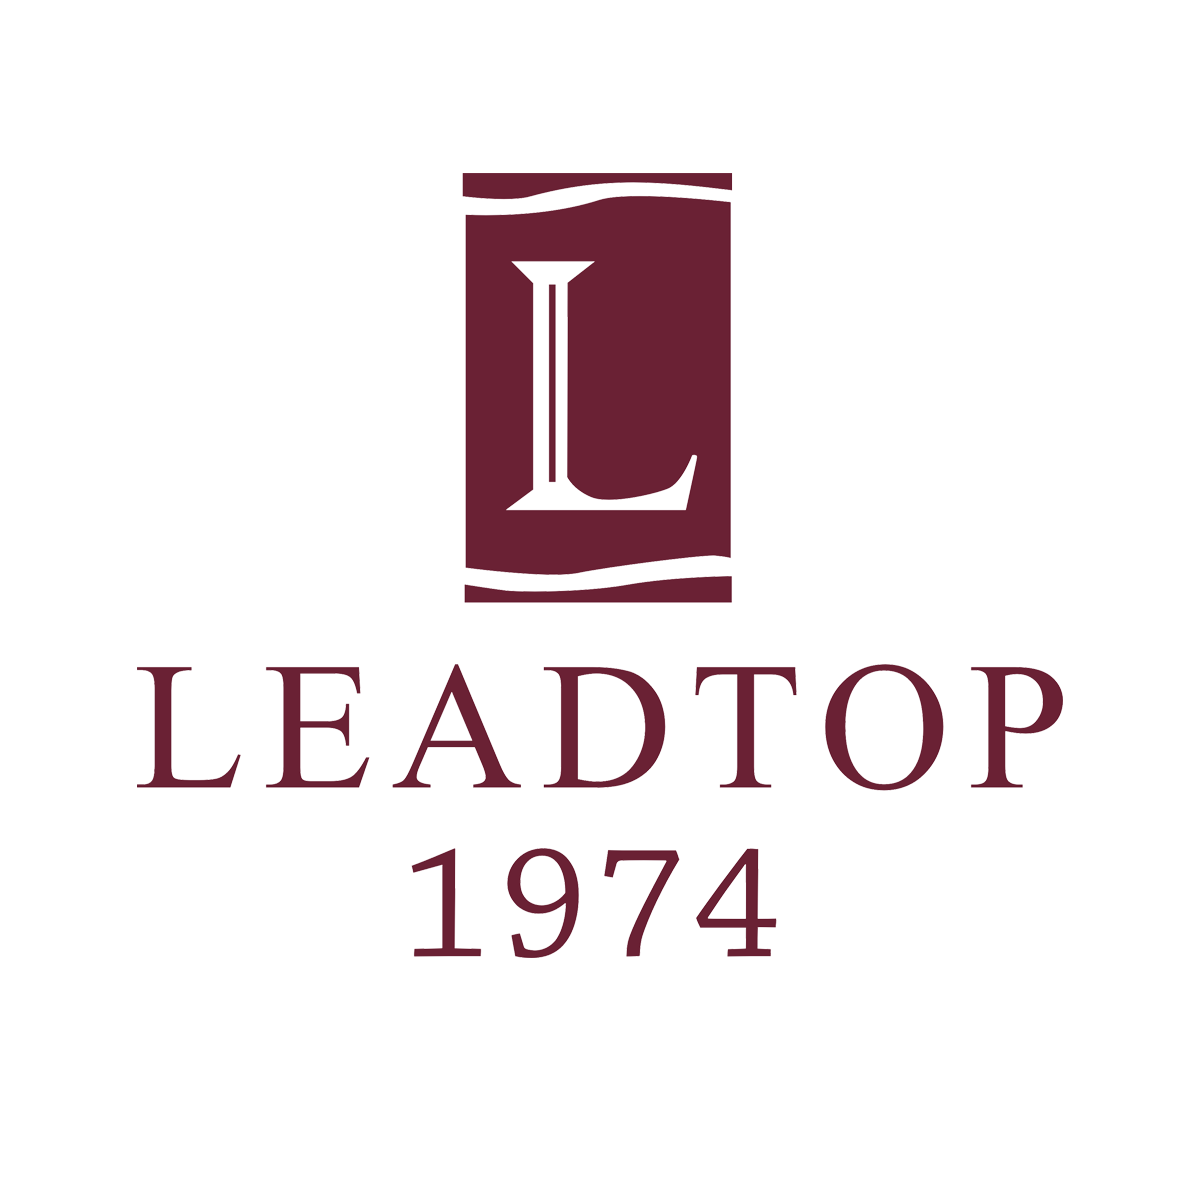 LEADTOP Steel JewelryDropshipp for Shopify